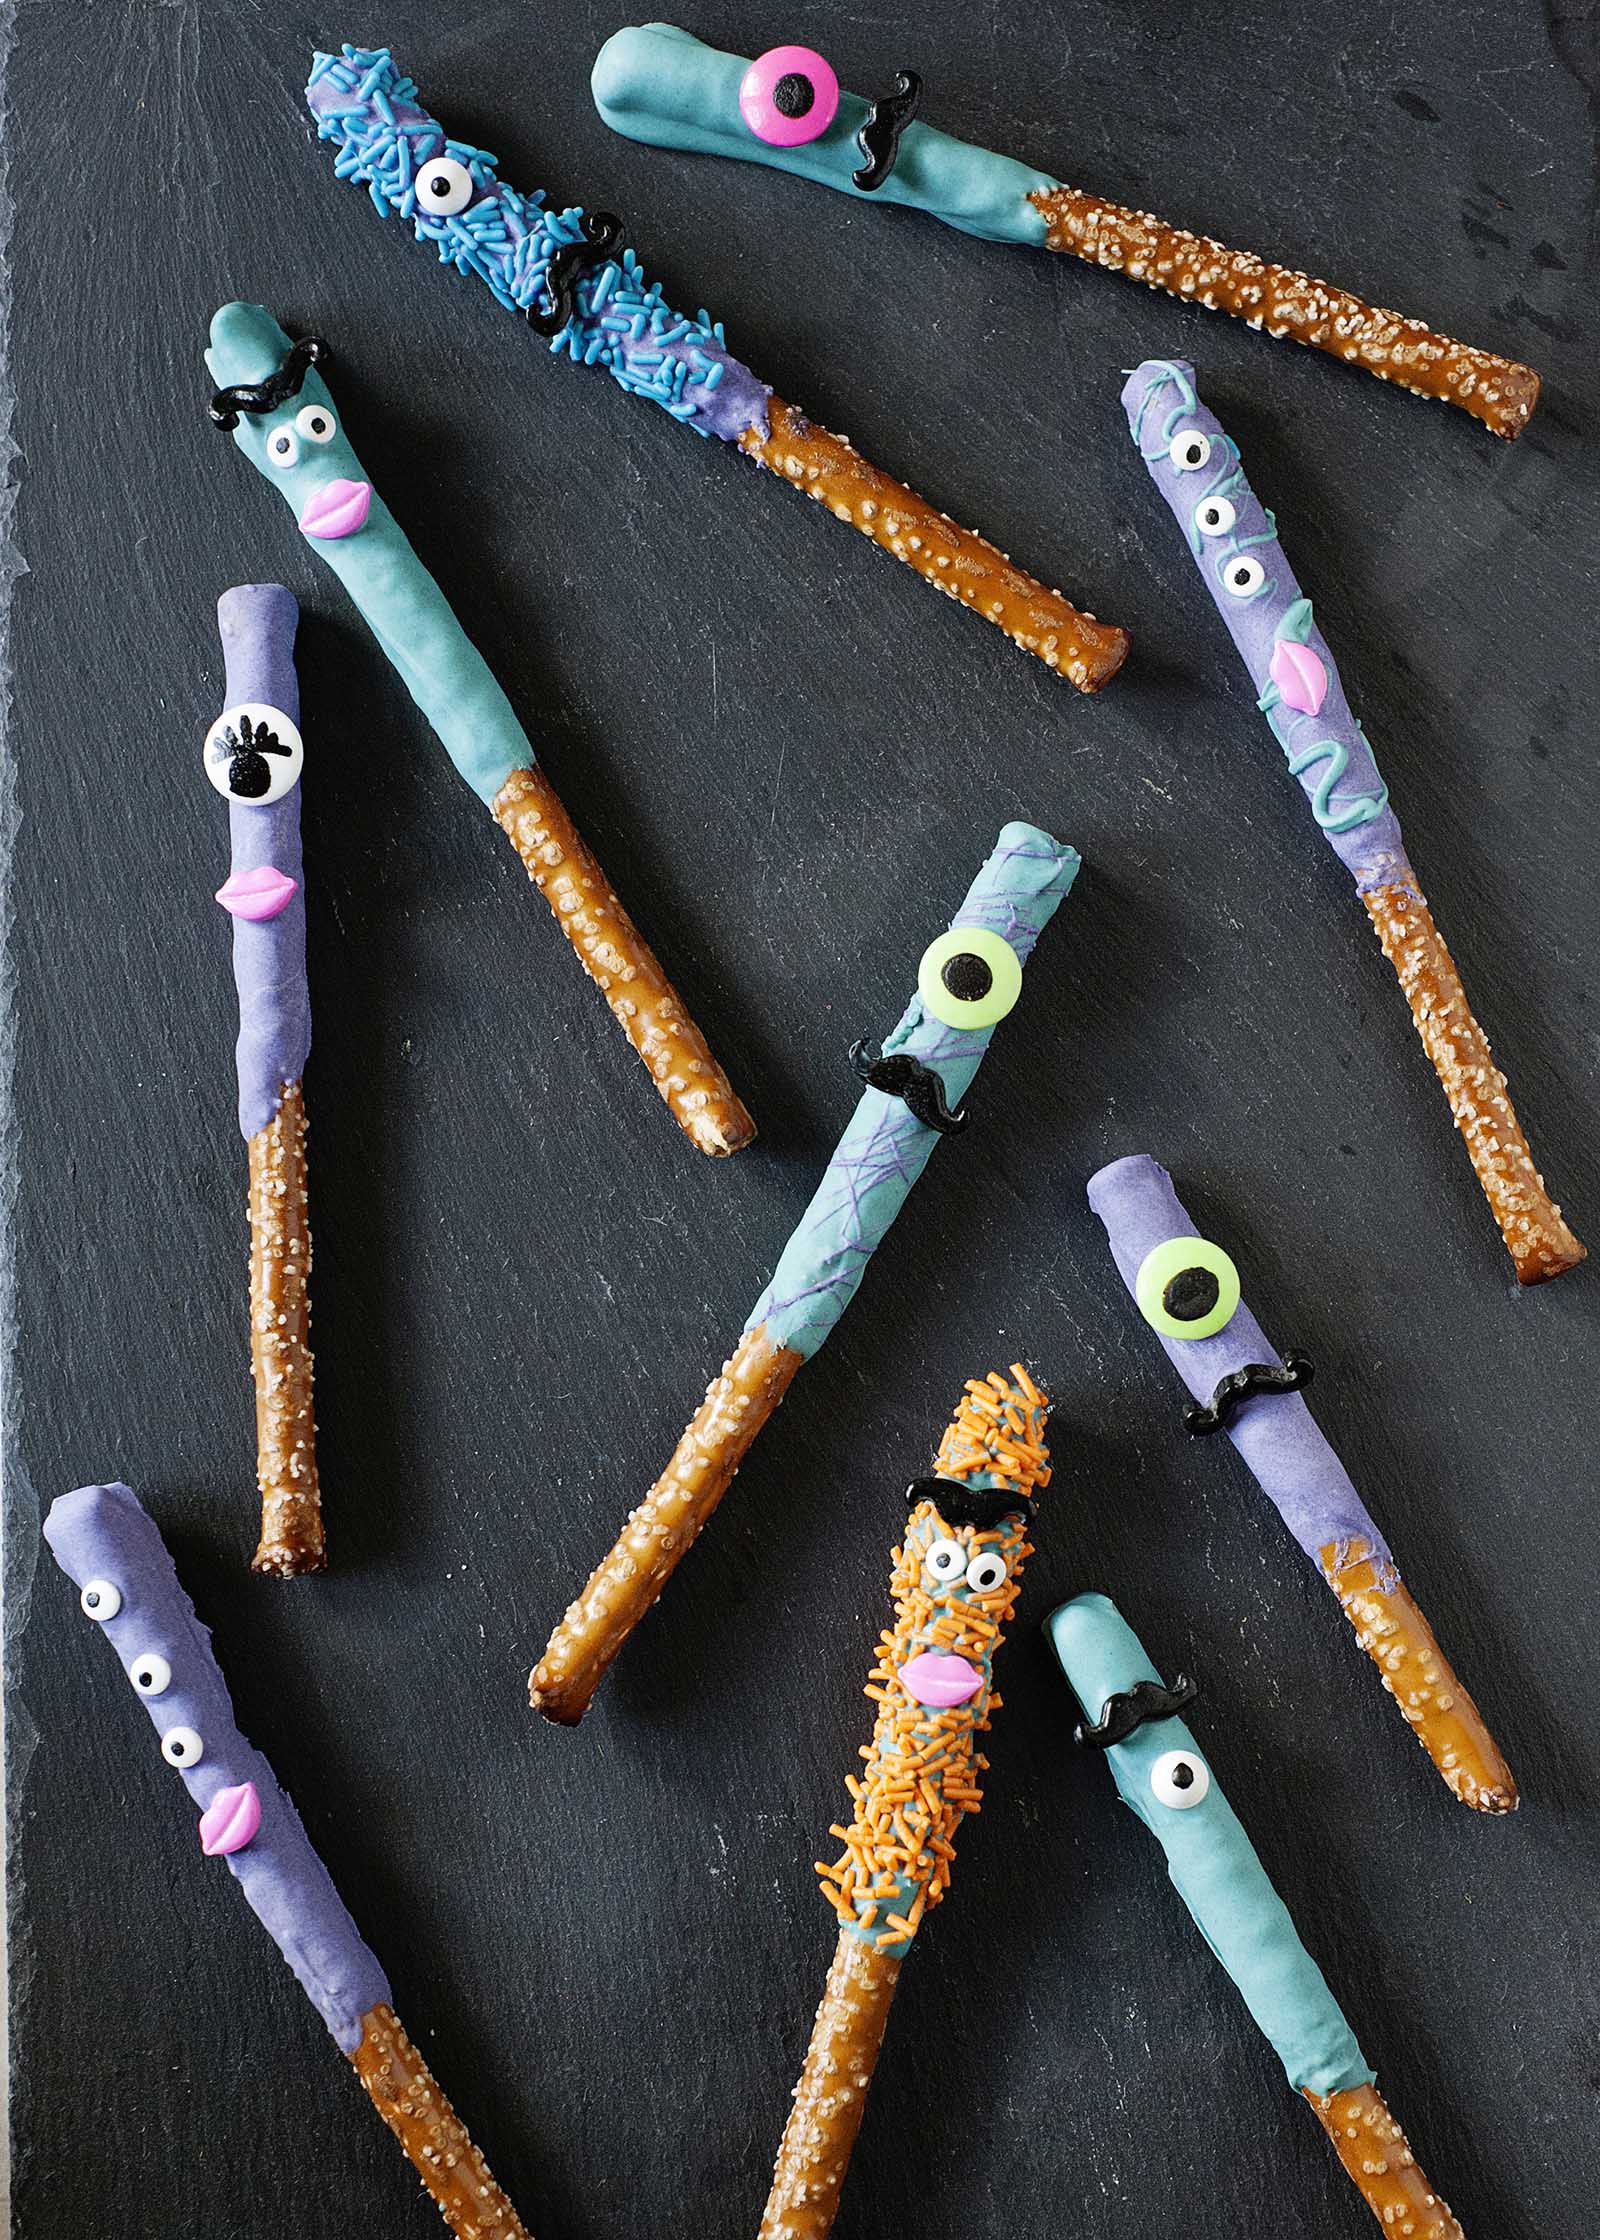 Homemade halloween-themed chocoalte covered pretzels decorated with eyes and lips on a dark gray background.